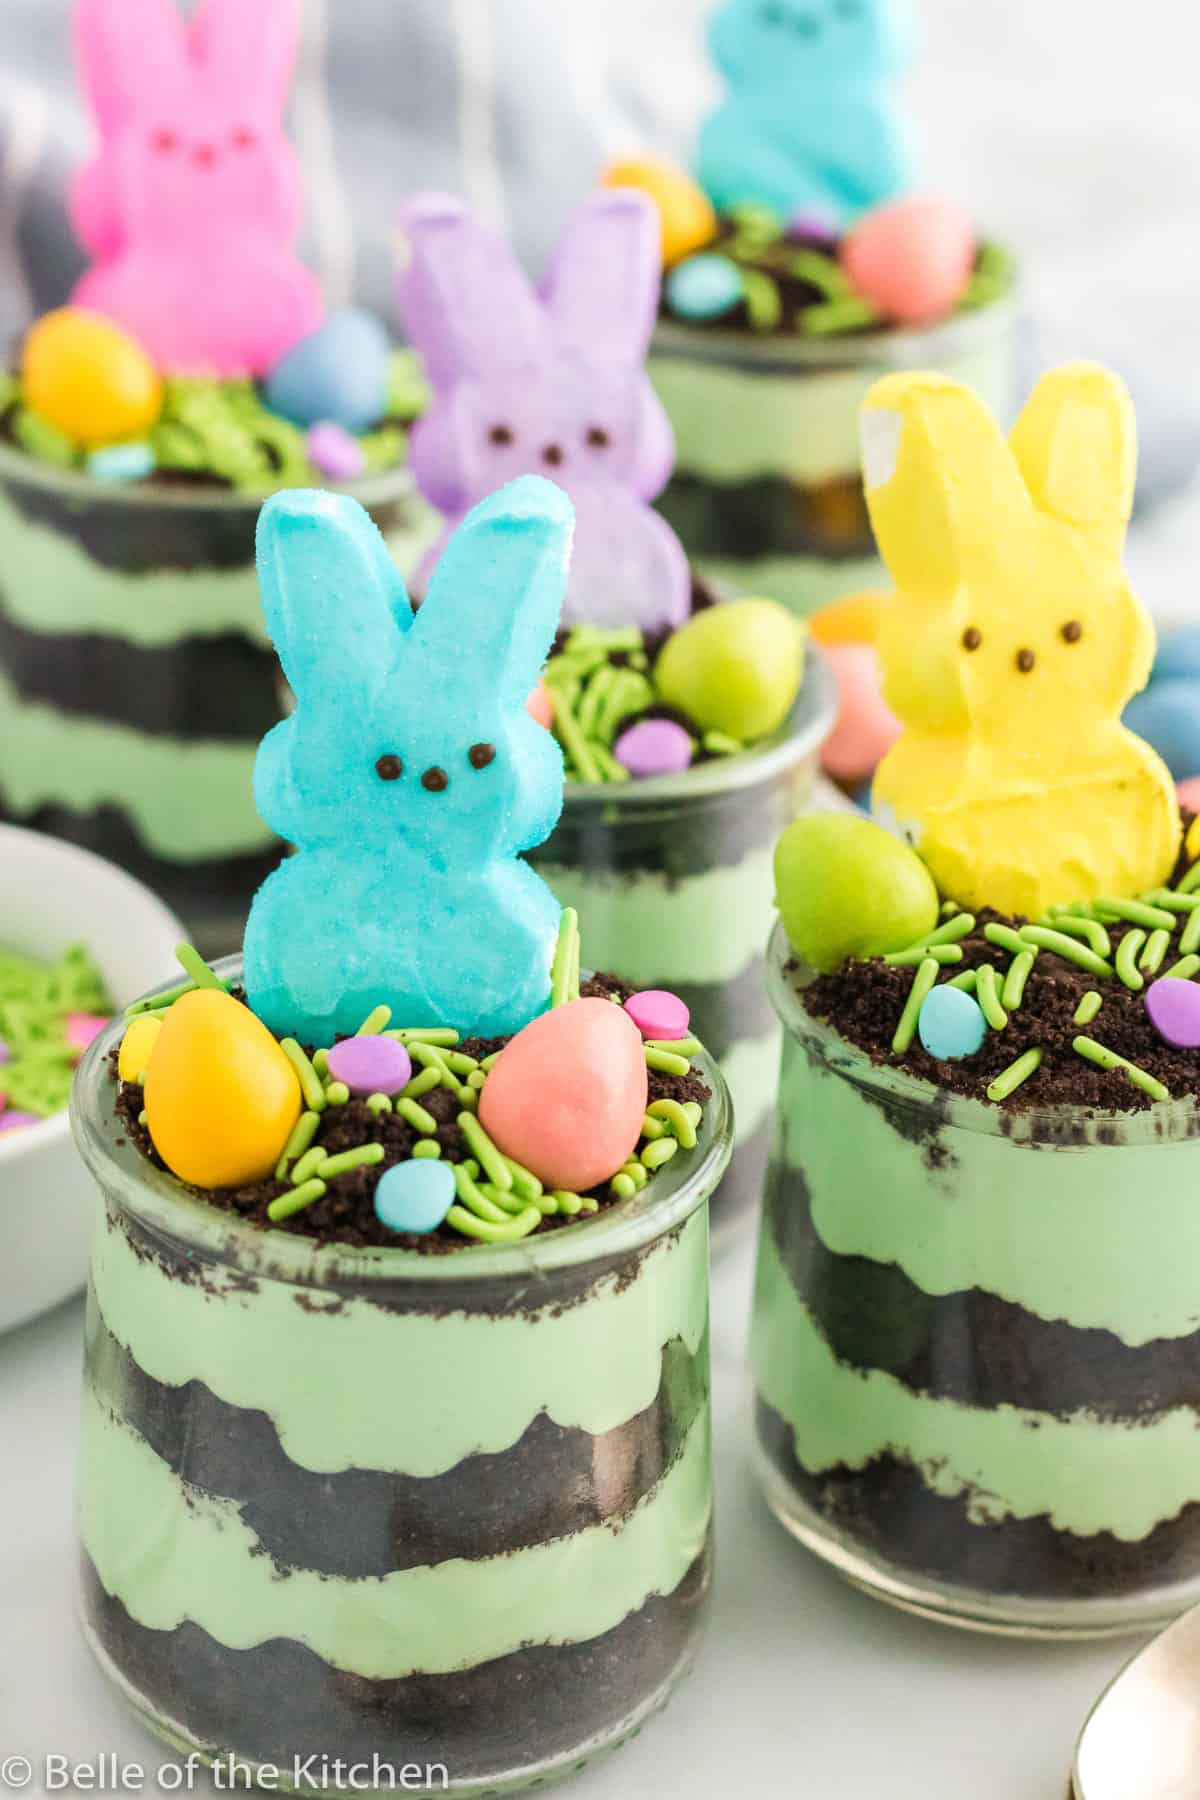 easter dirt cake cups next to spoons